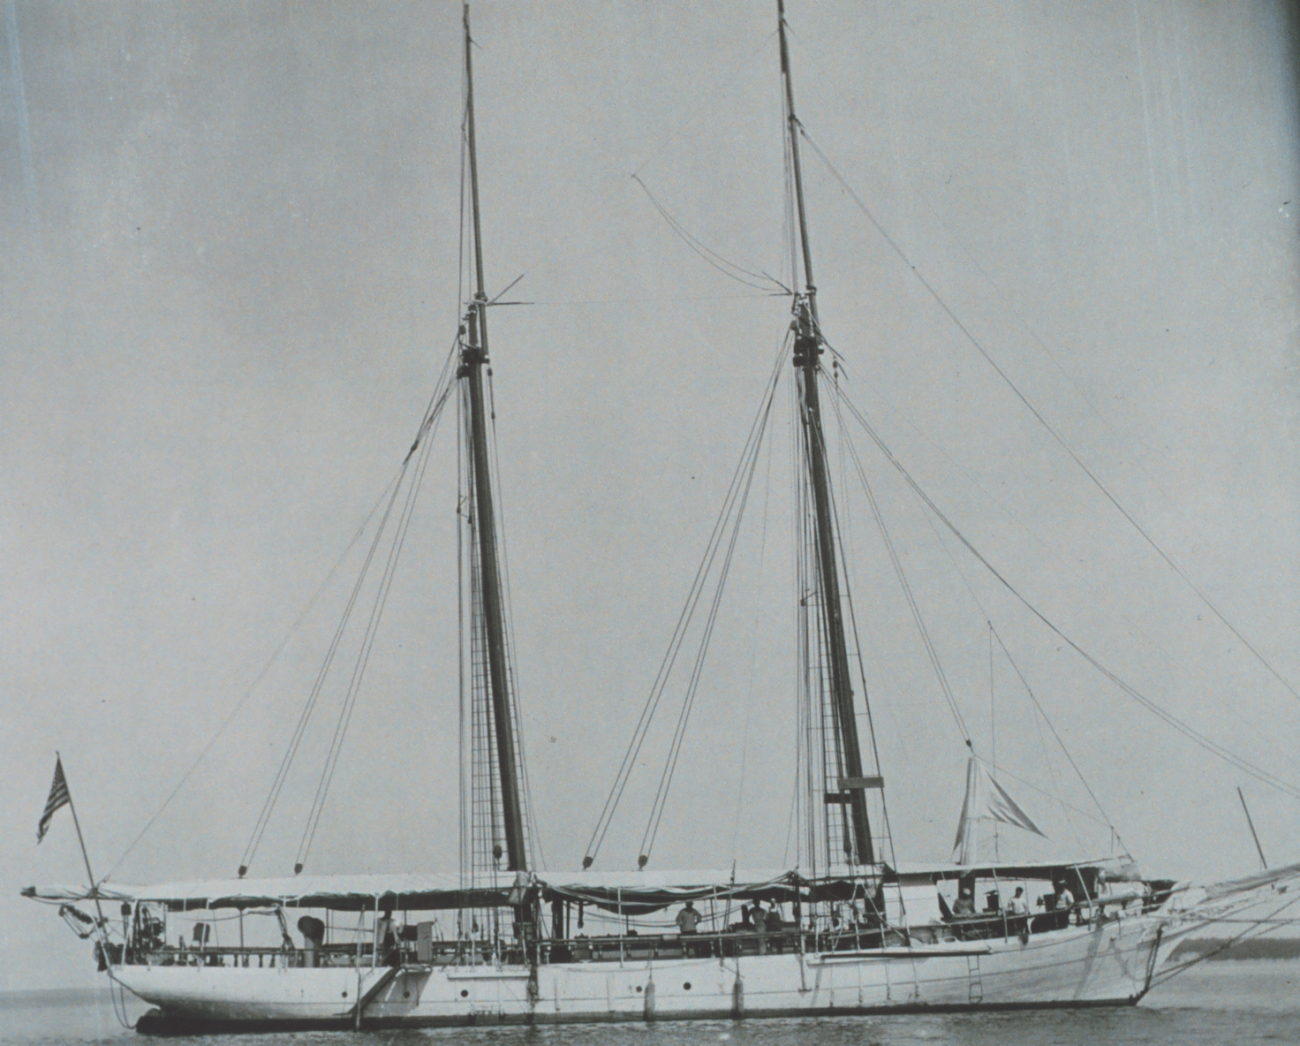 The Coast and Geodetic Survey Schooner  MATCHLESS